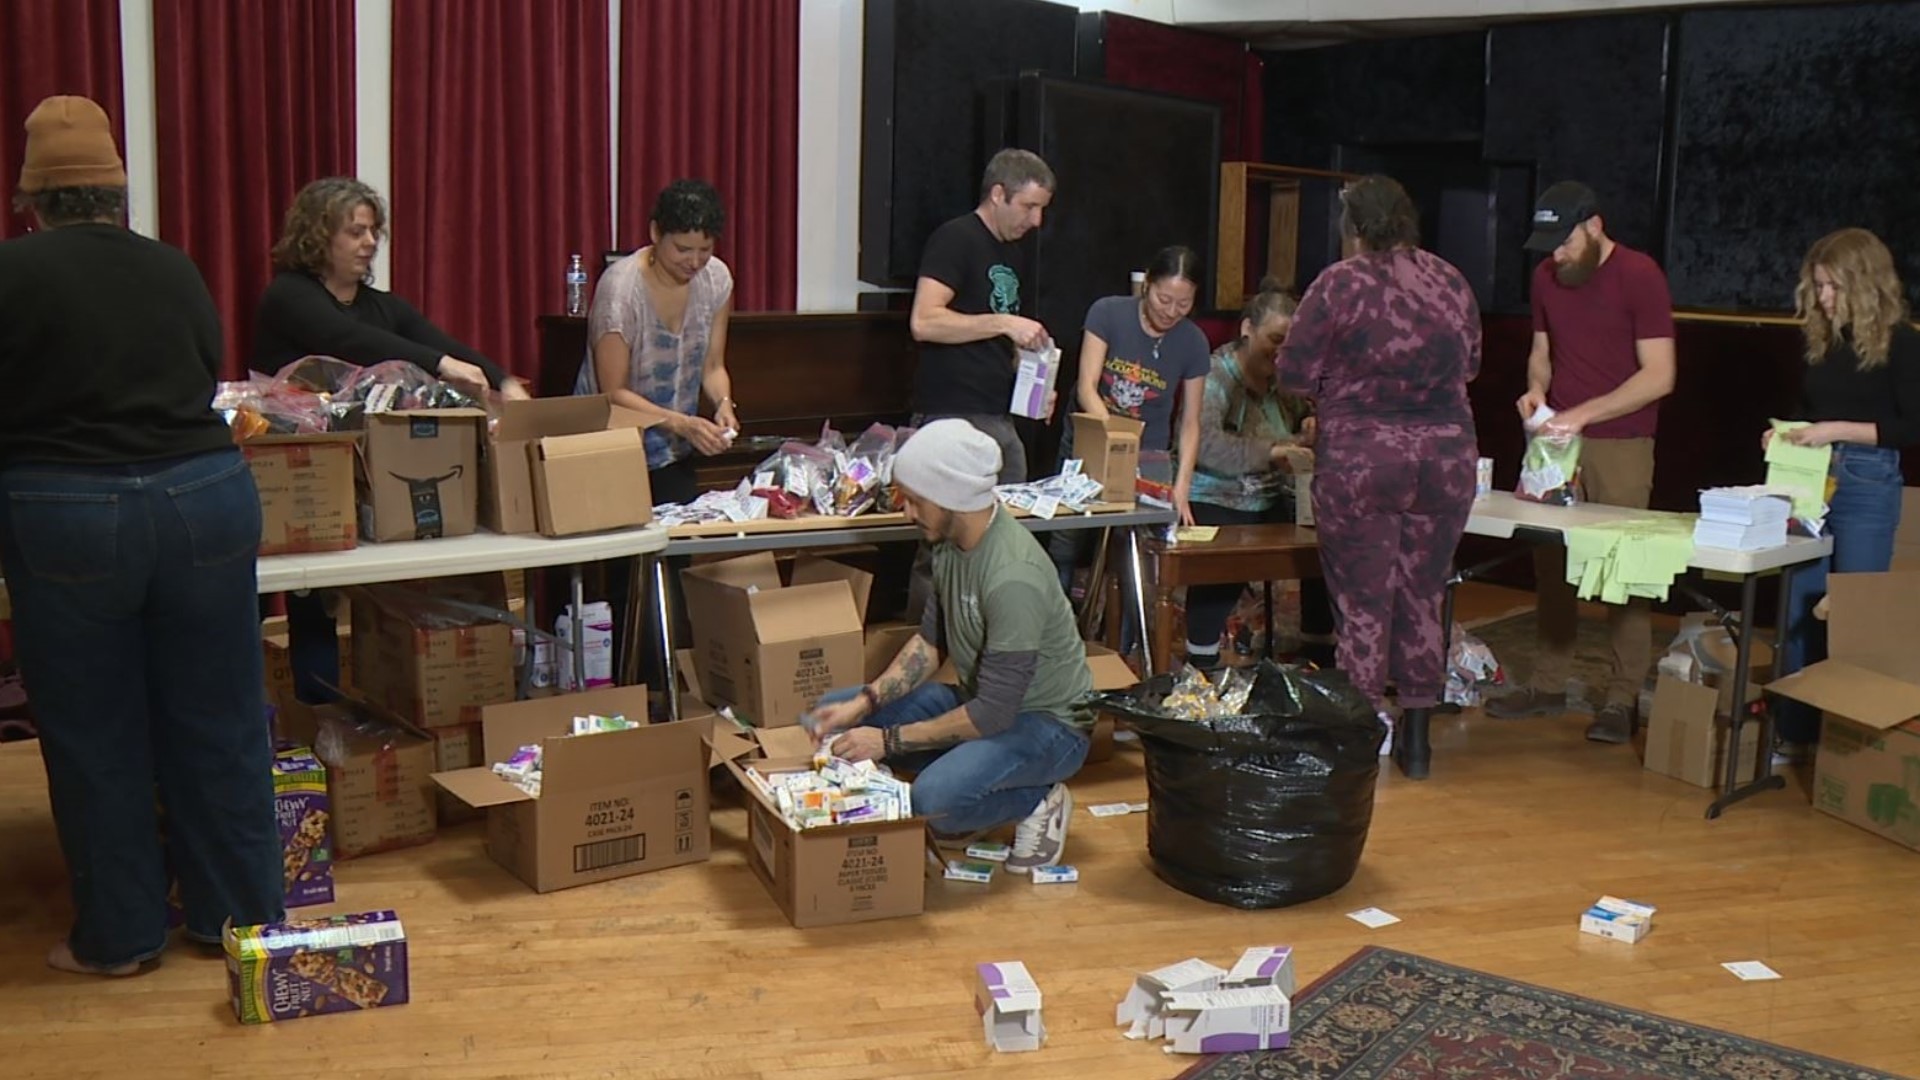 Artists, managers and booking agents are handing out more than a thousand care packages this month. #k5evening